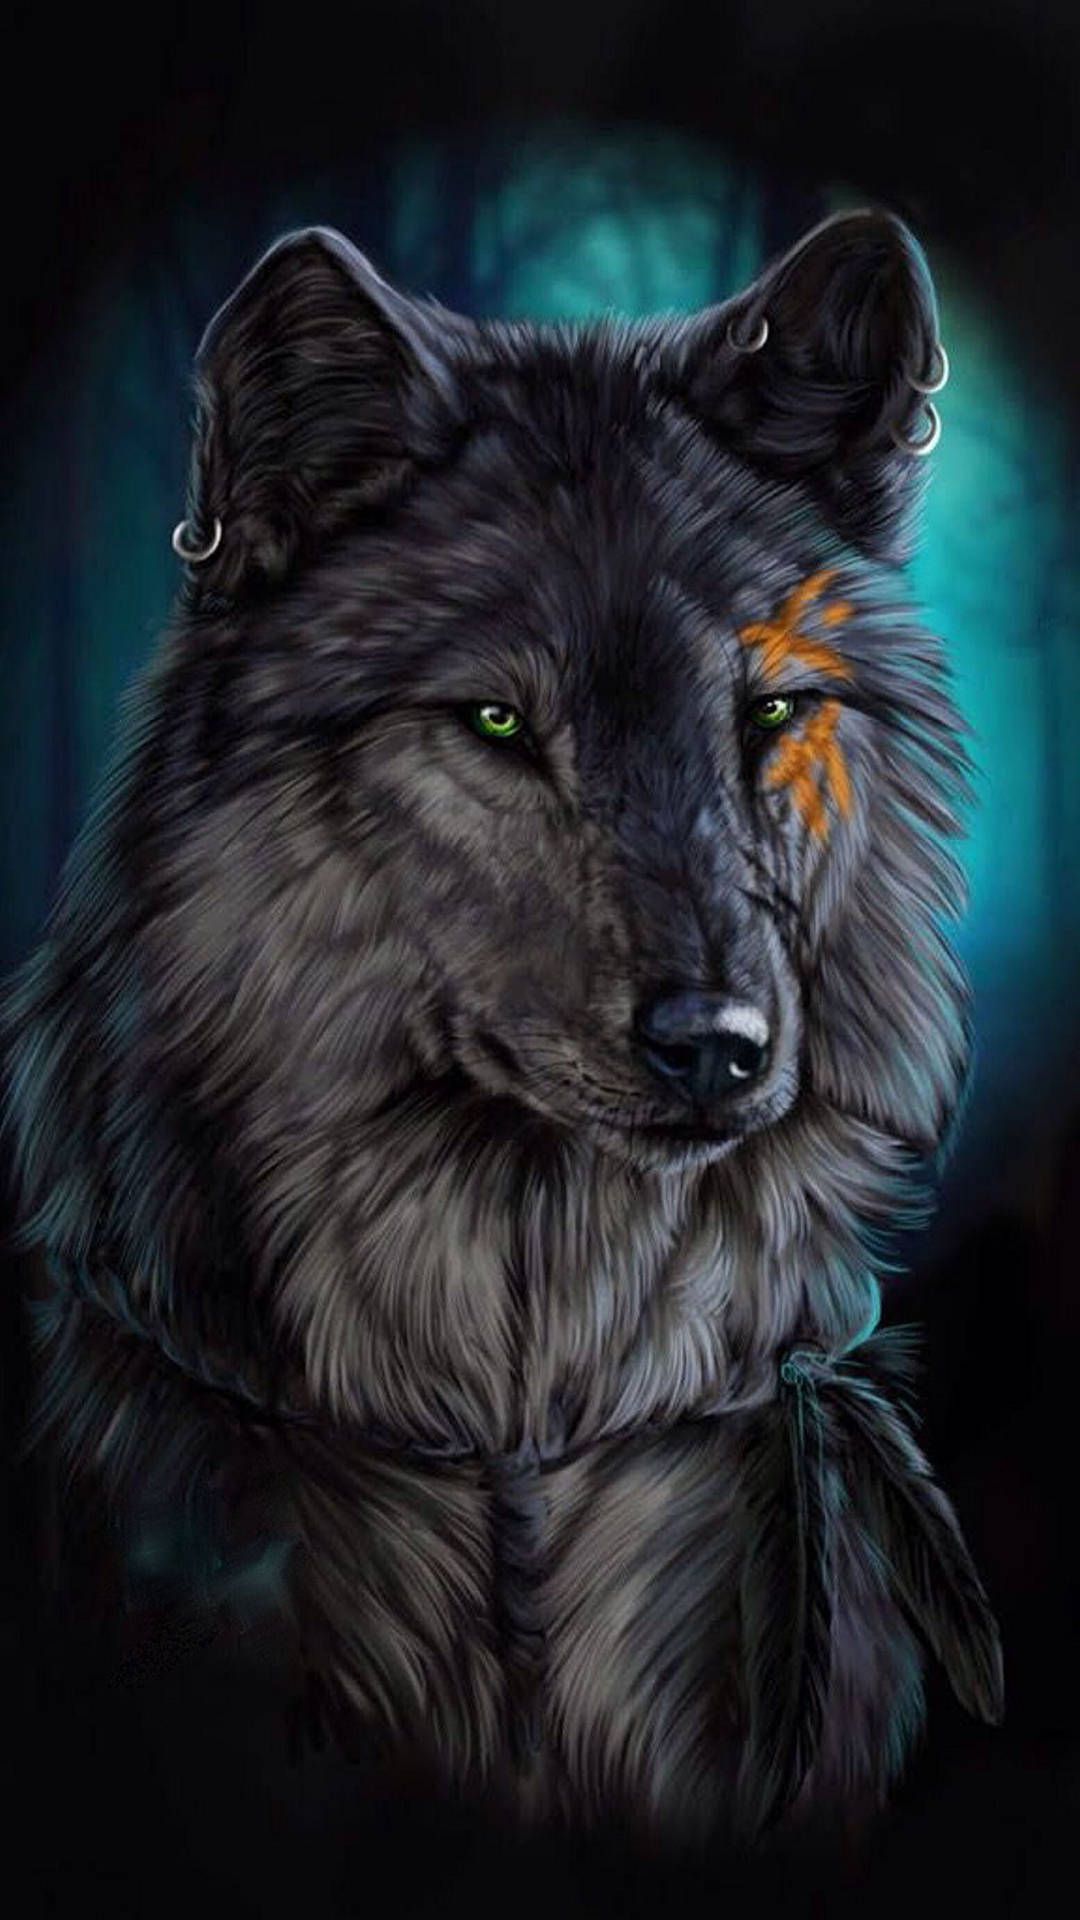 Gray And Black Wolf In Blue Wallpaper